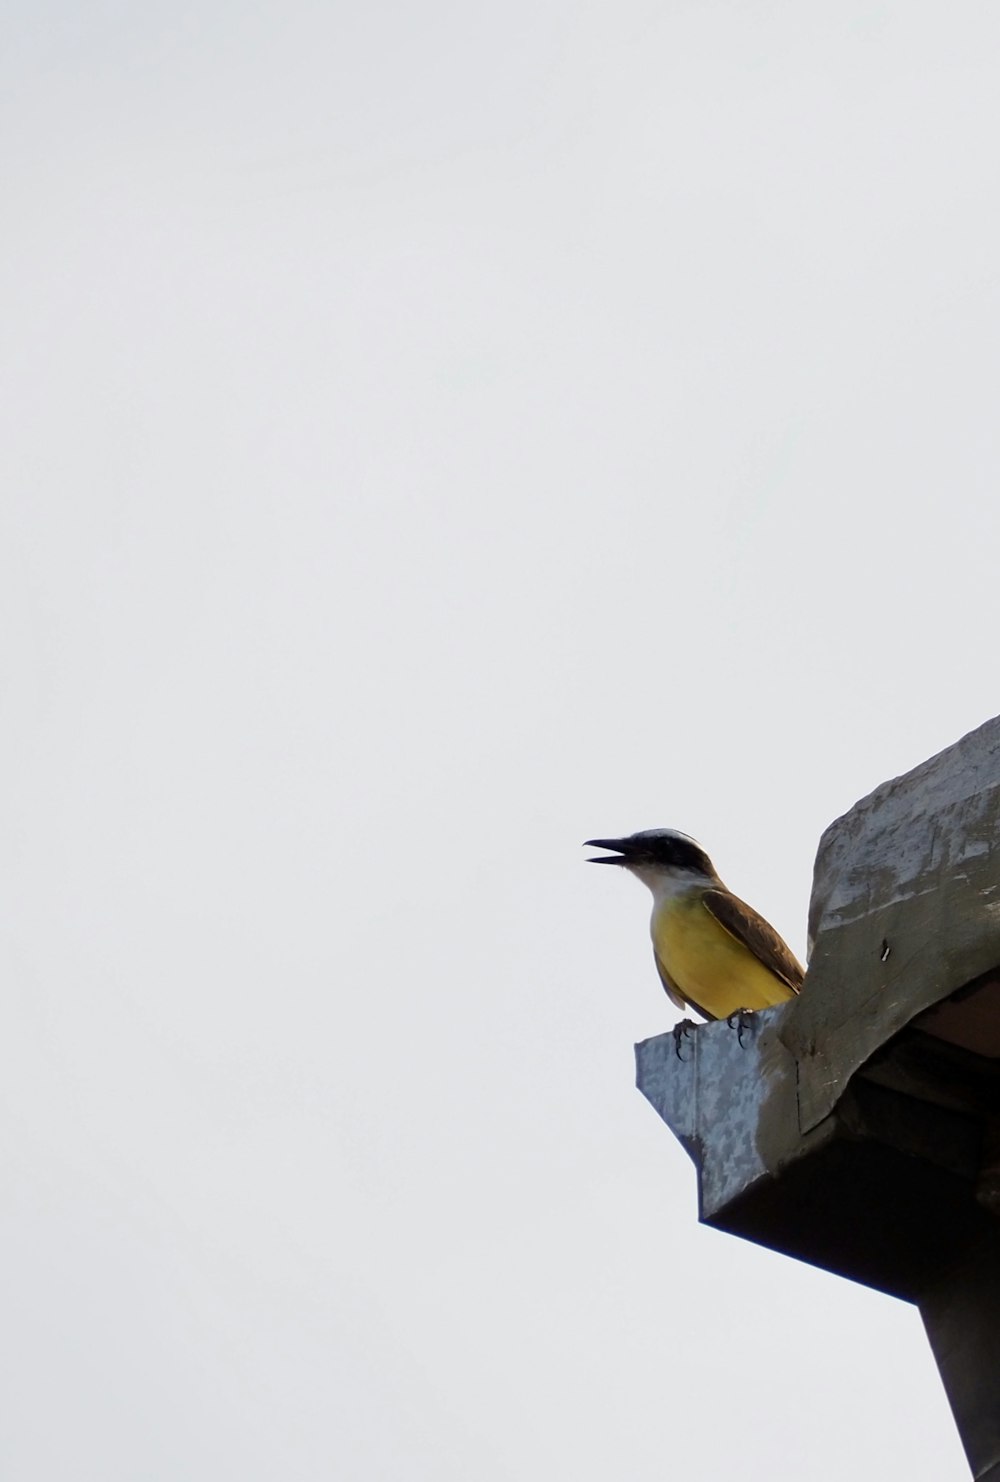 yellow and gray bird on gray concrete post